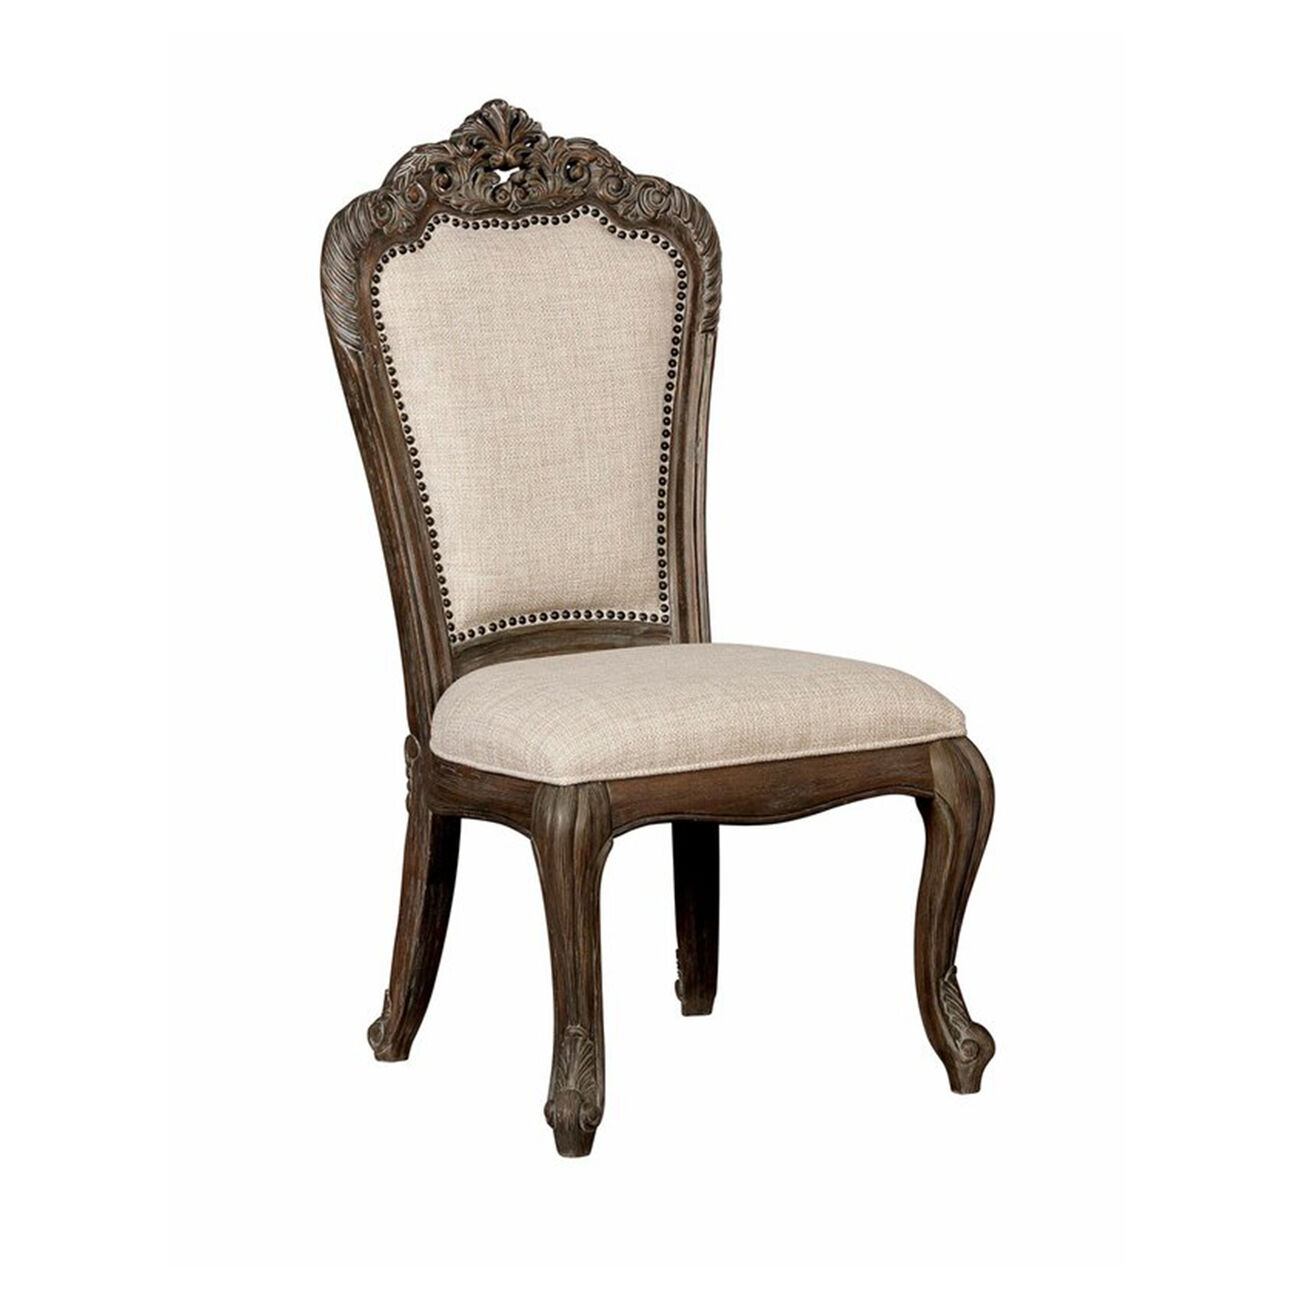 Wooden Side Chair with Nailhead Trim Details, Set of 2, Beige and Brown